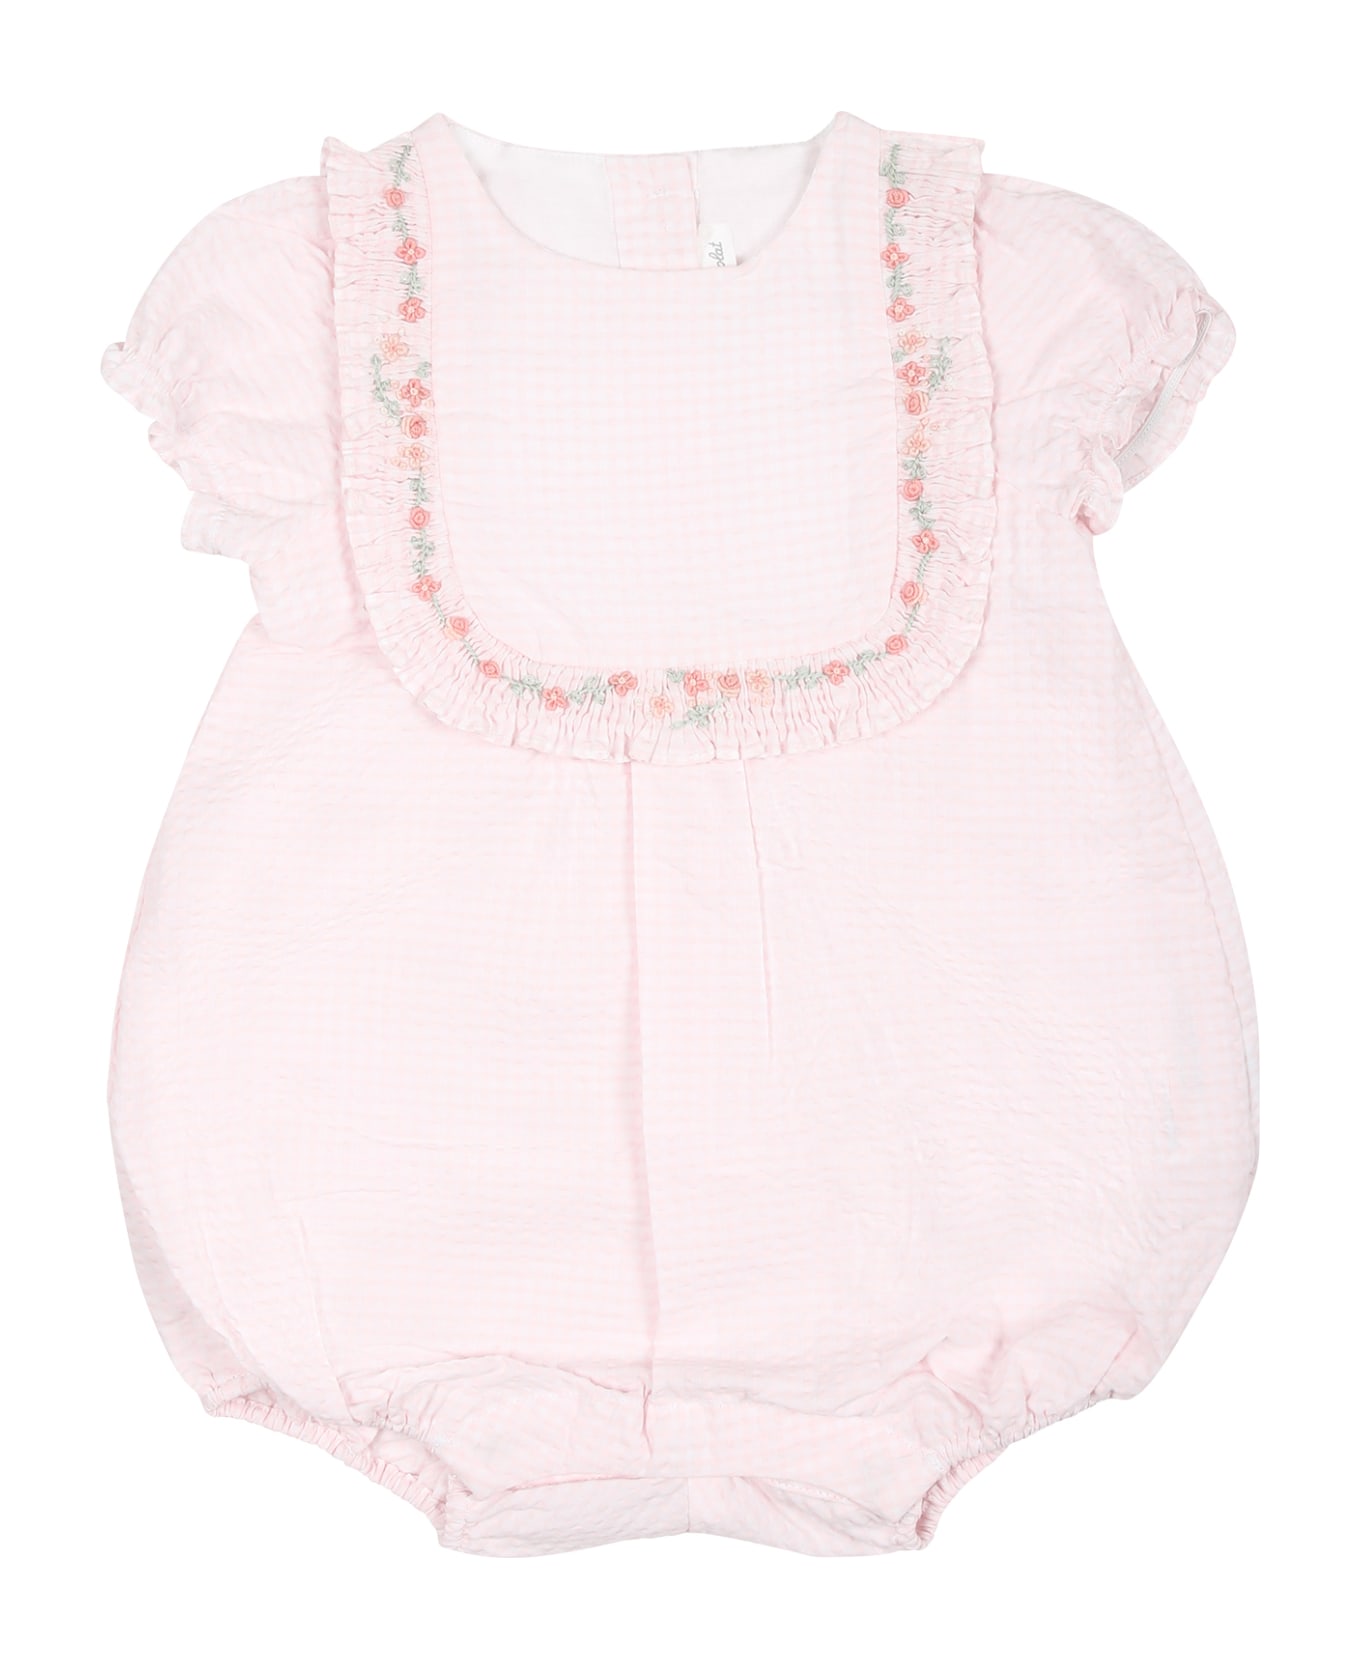 Tartine et Chocolat Pink Romper For Baby Girl With Liberty Fabric - Pink